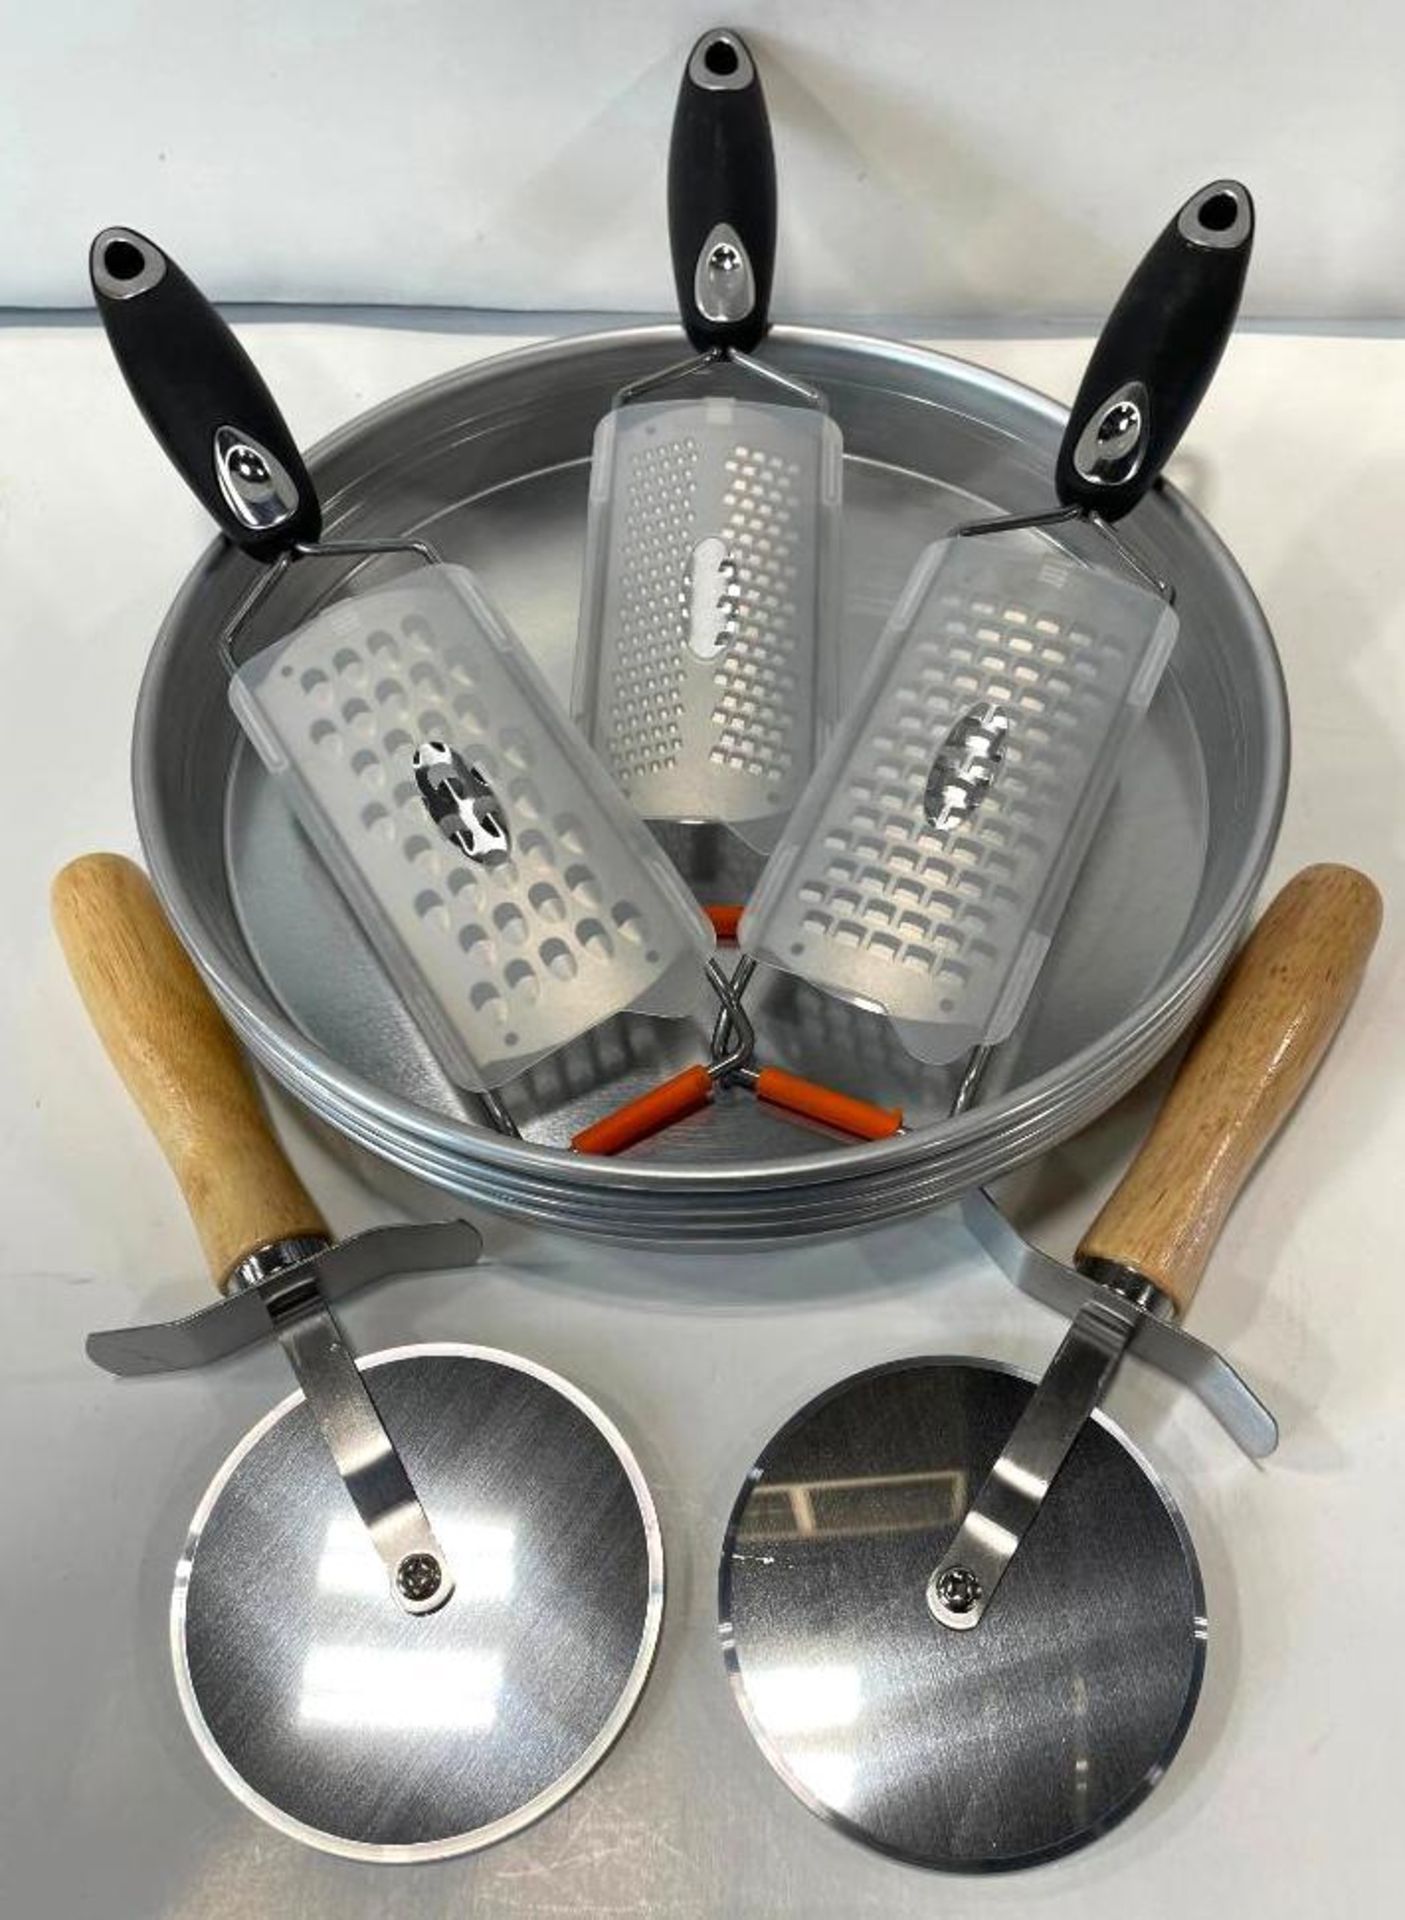 10" PIZZA PAN SET INCLUDING: (4) 15" PIZZA PANS, (2) PIZZA CUTTERS & (3) GRATERS